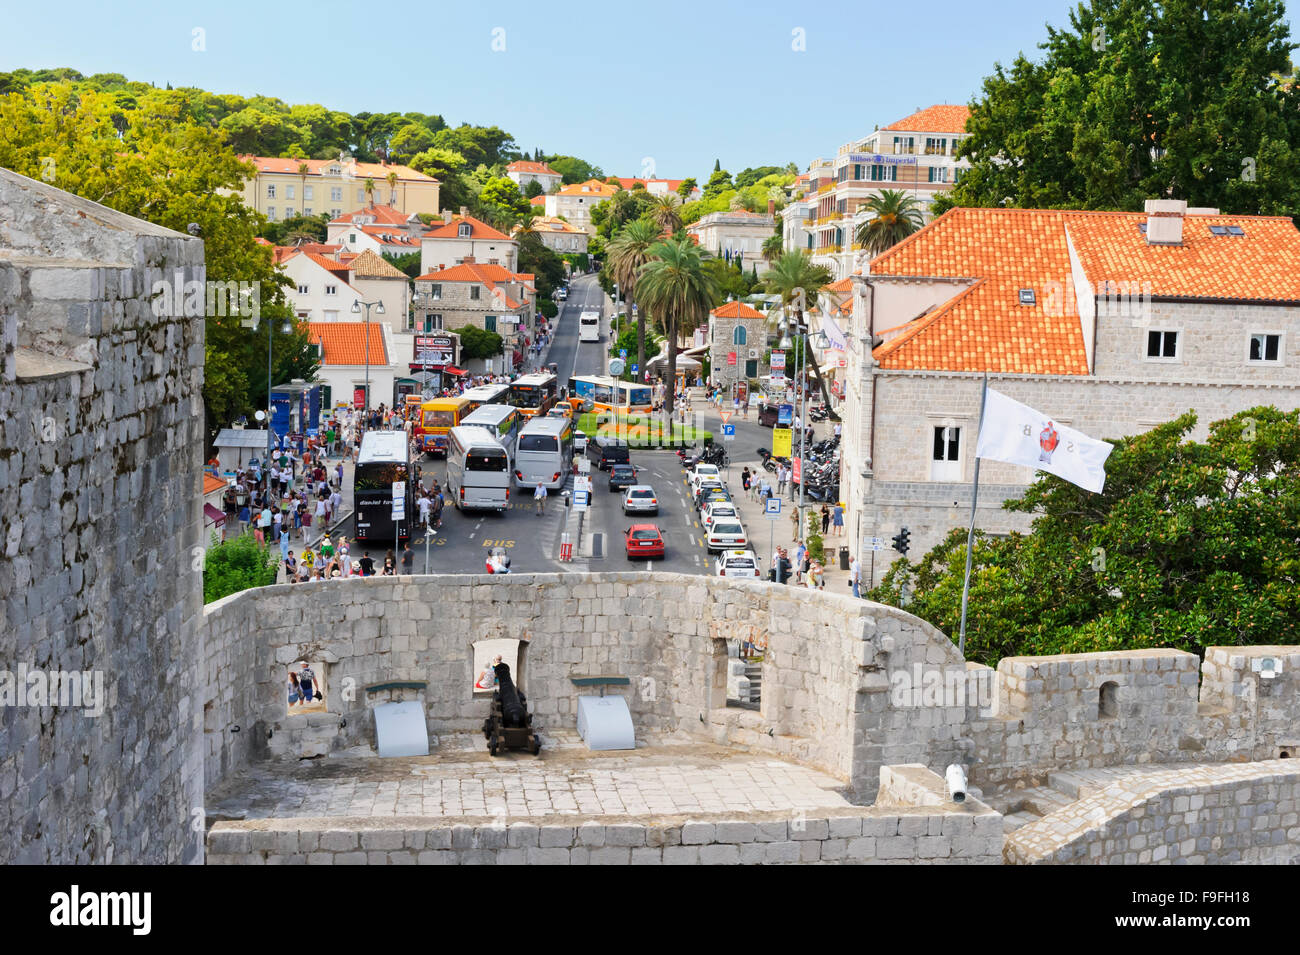 The old town in Dubrovnik busy during the summer vacation, Croatia. Stock Photo